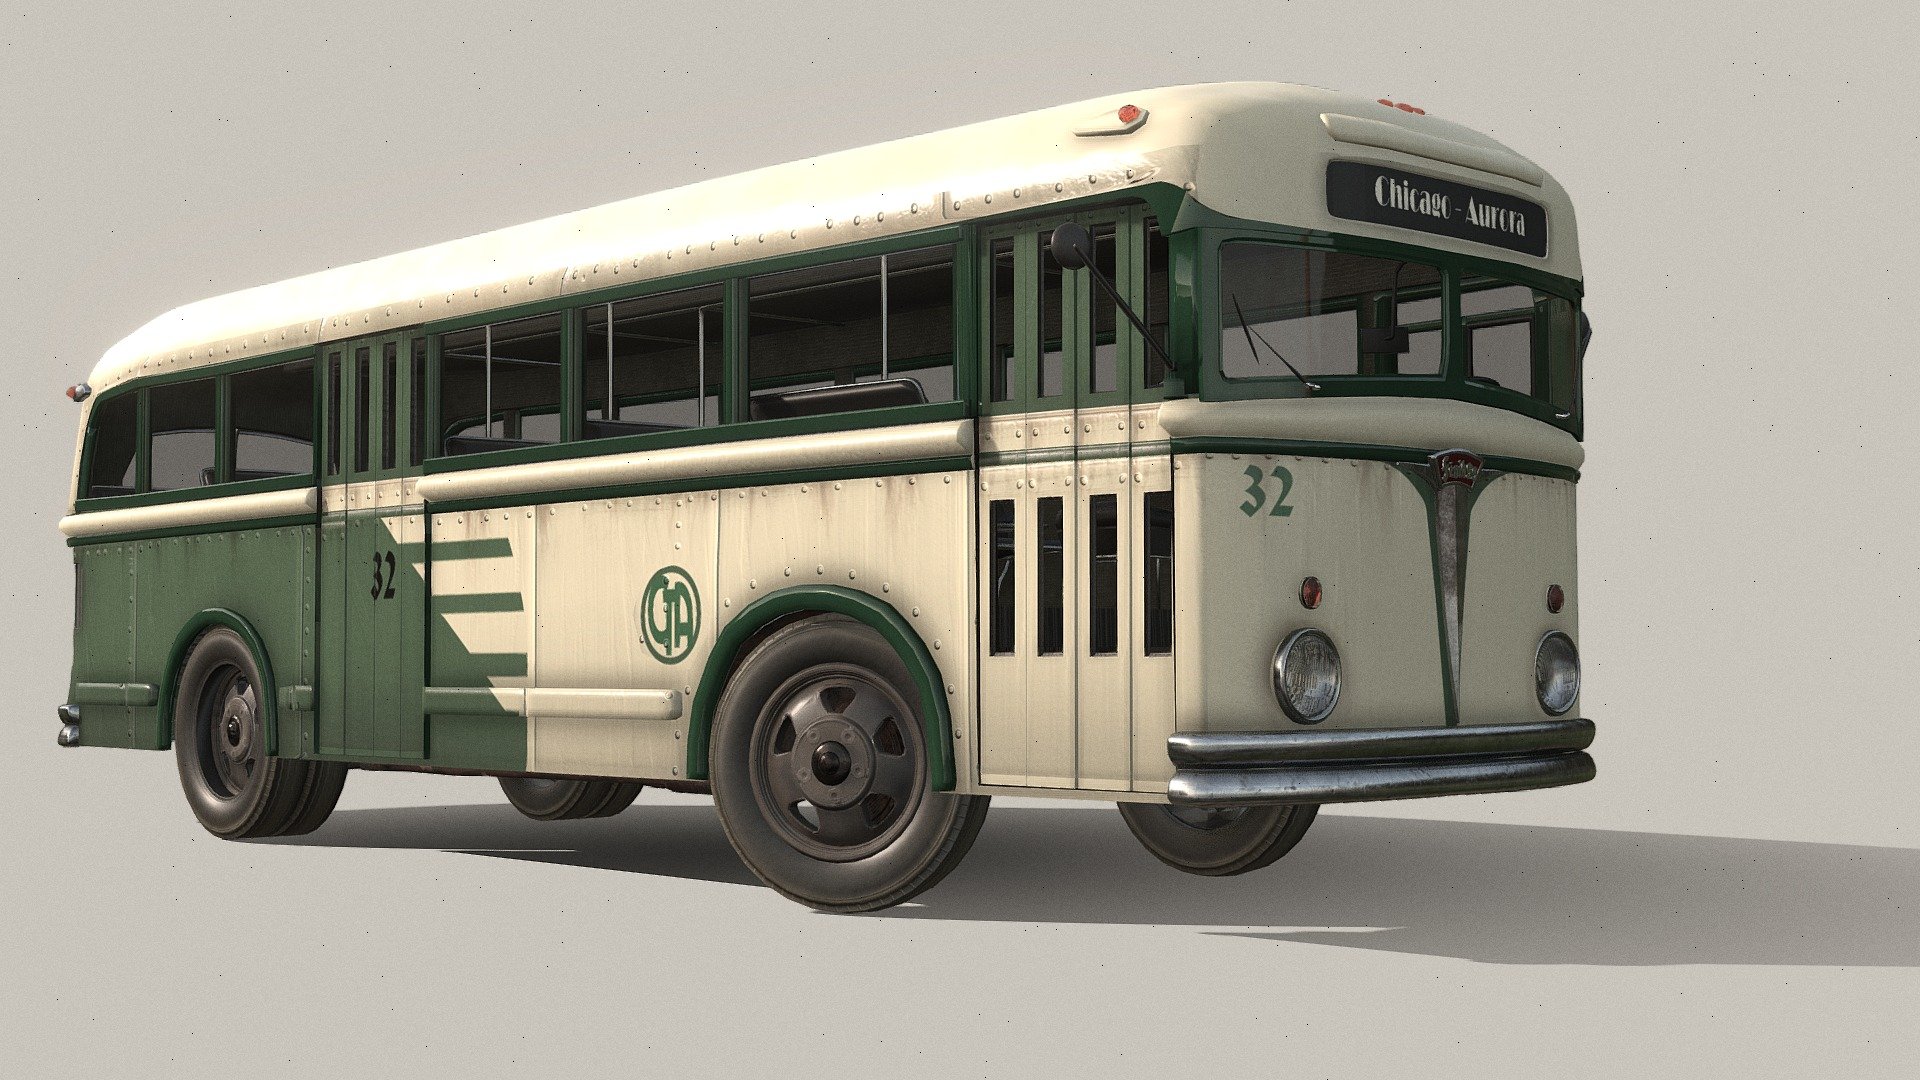 A bus based on the 1938 White Motor Company bus, found in cities like San Francisco and Chiacgo. Ambiguous branding, Latvian signs. 
Additional file includes textures, blend file and fbx file 3d model